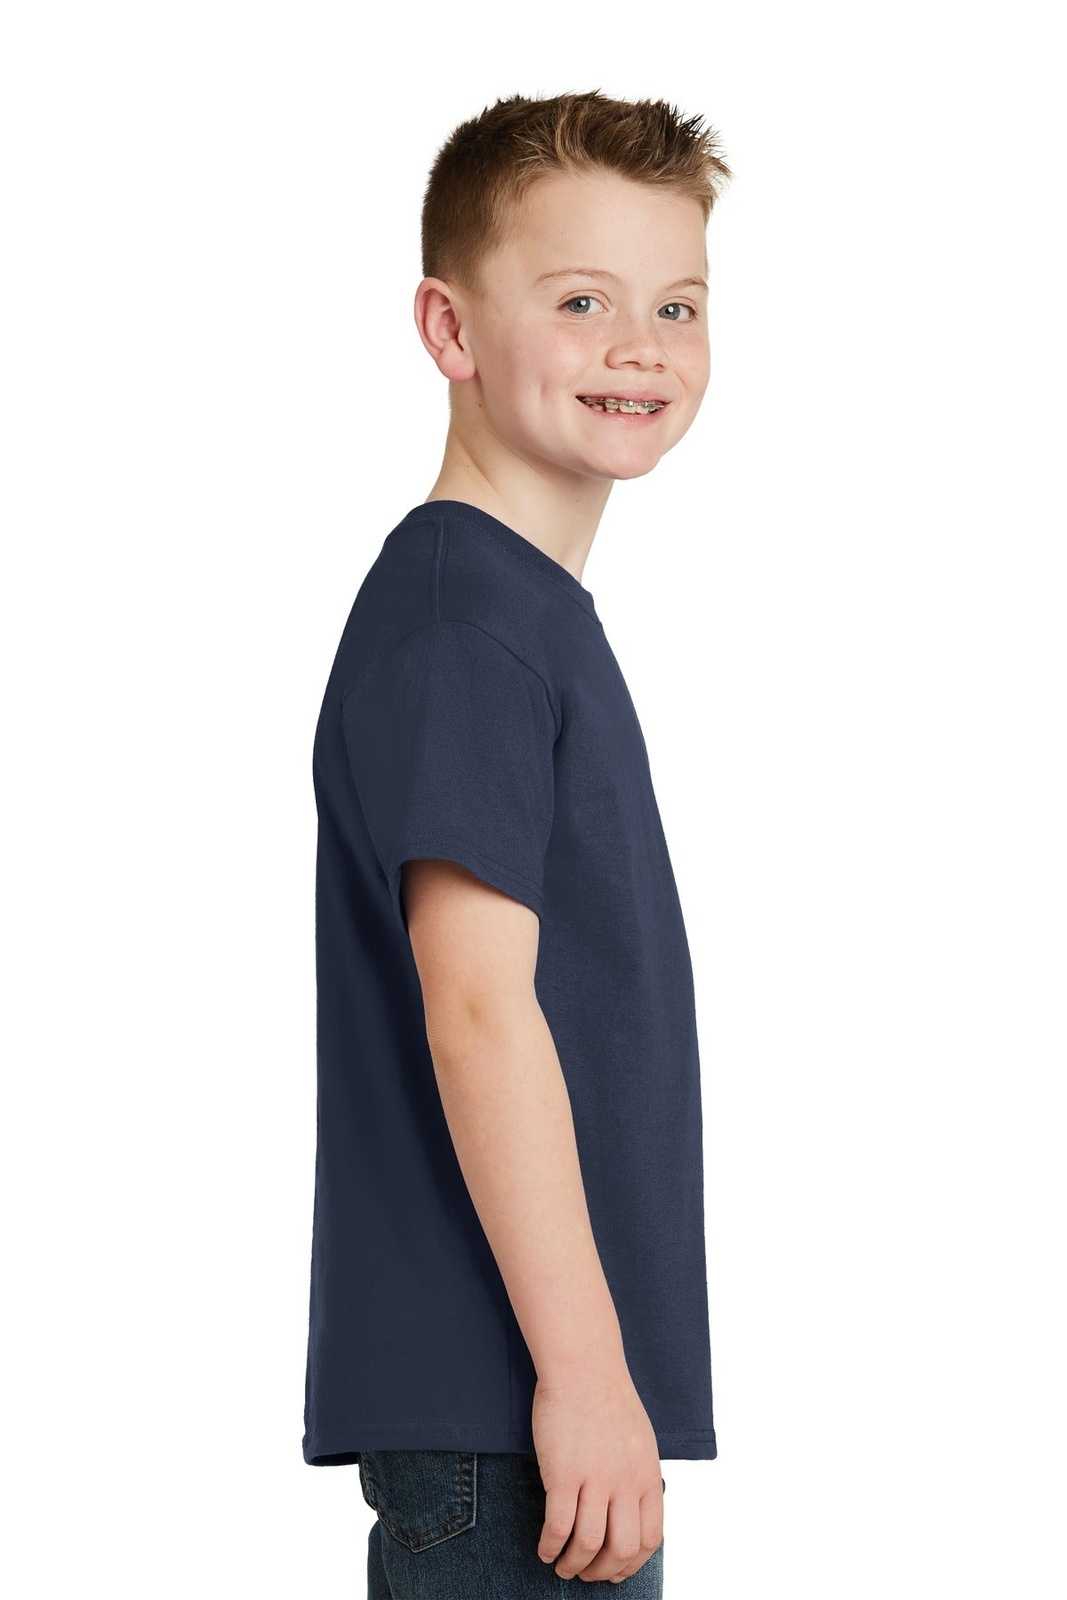 Hanes 5450 Youth Tagless 100% Cotton T-Shirt - Navy - HIT a Double